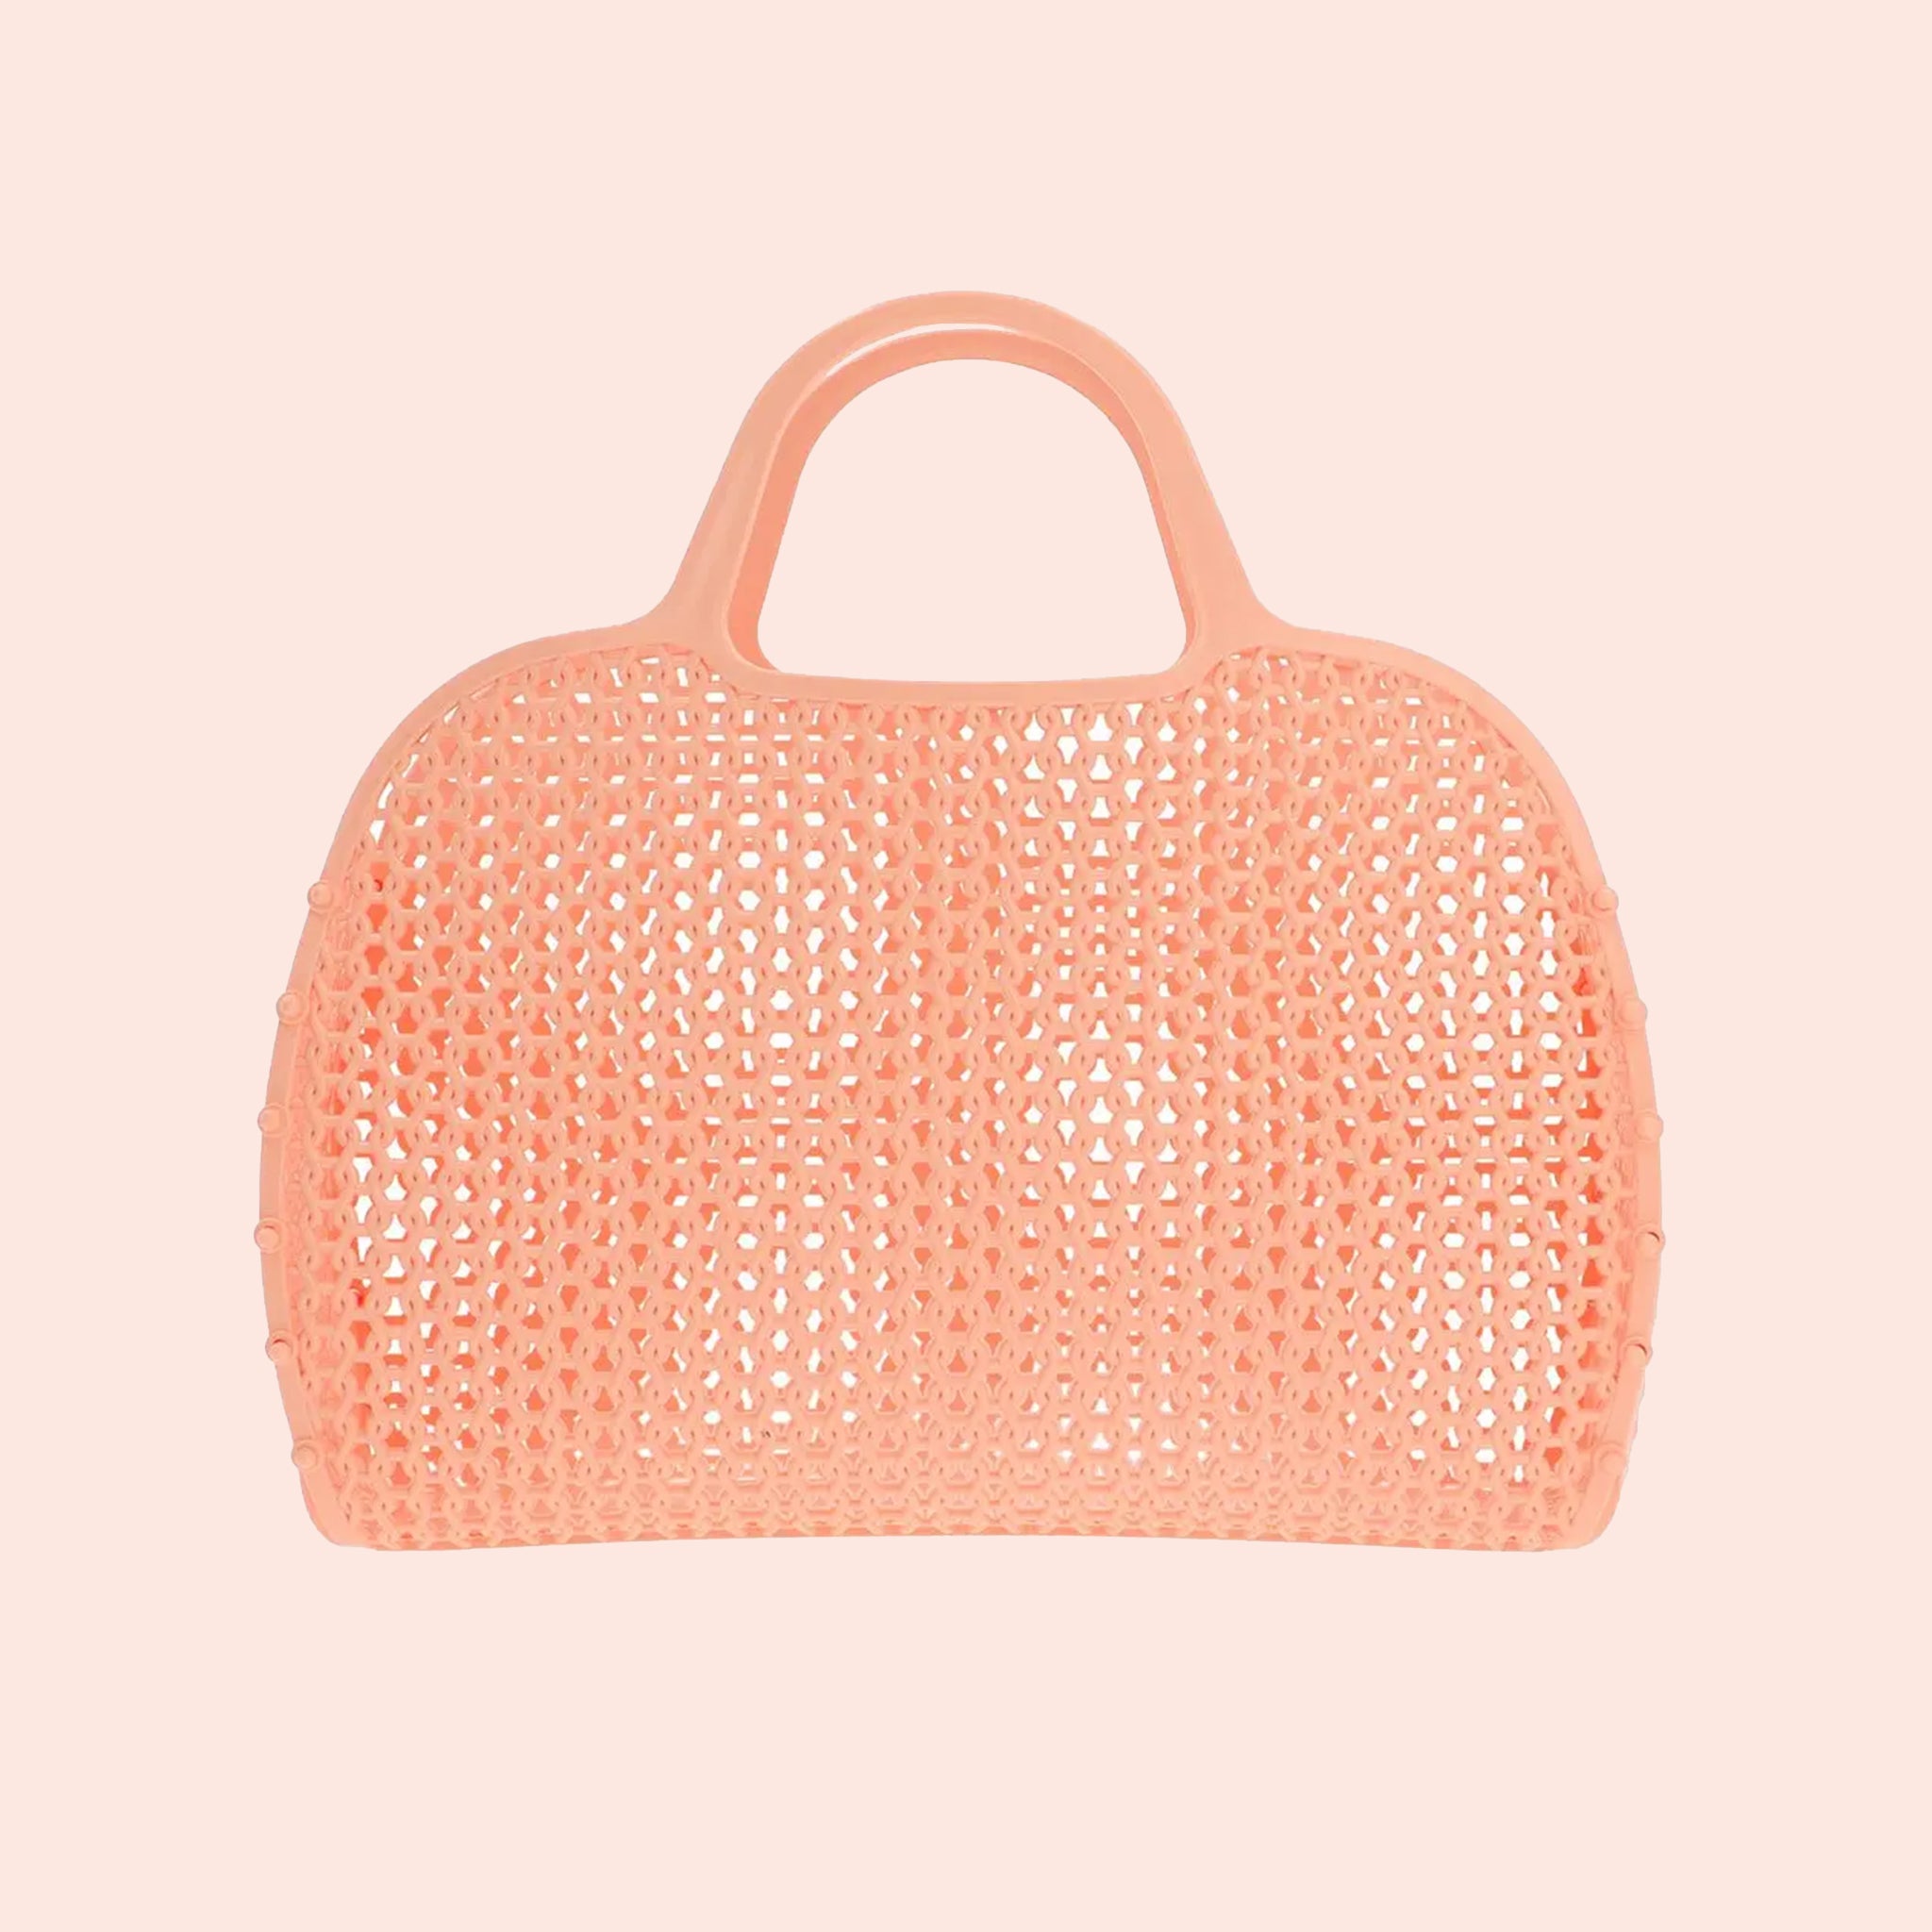 An apricot colored woven plastic handbag with two handles. 